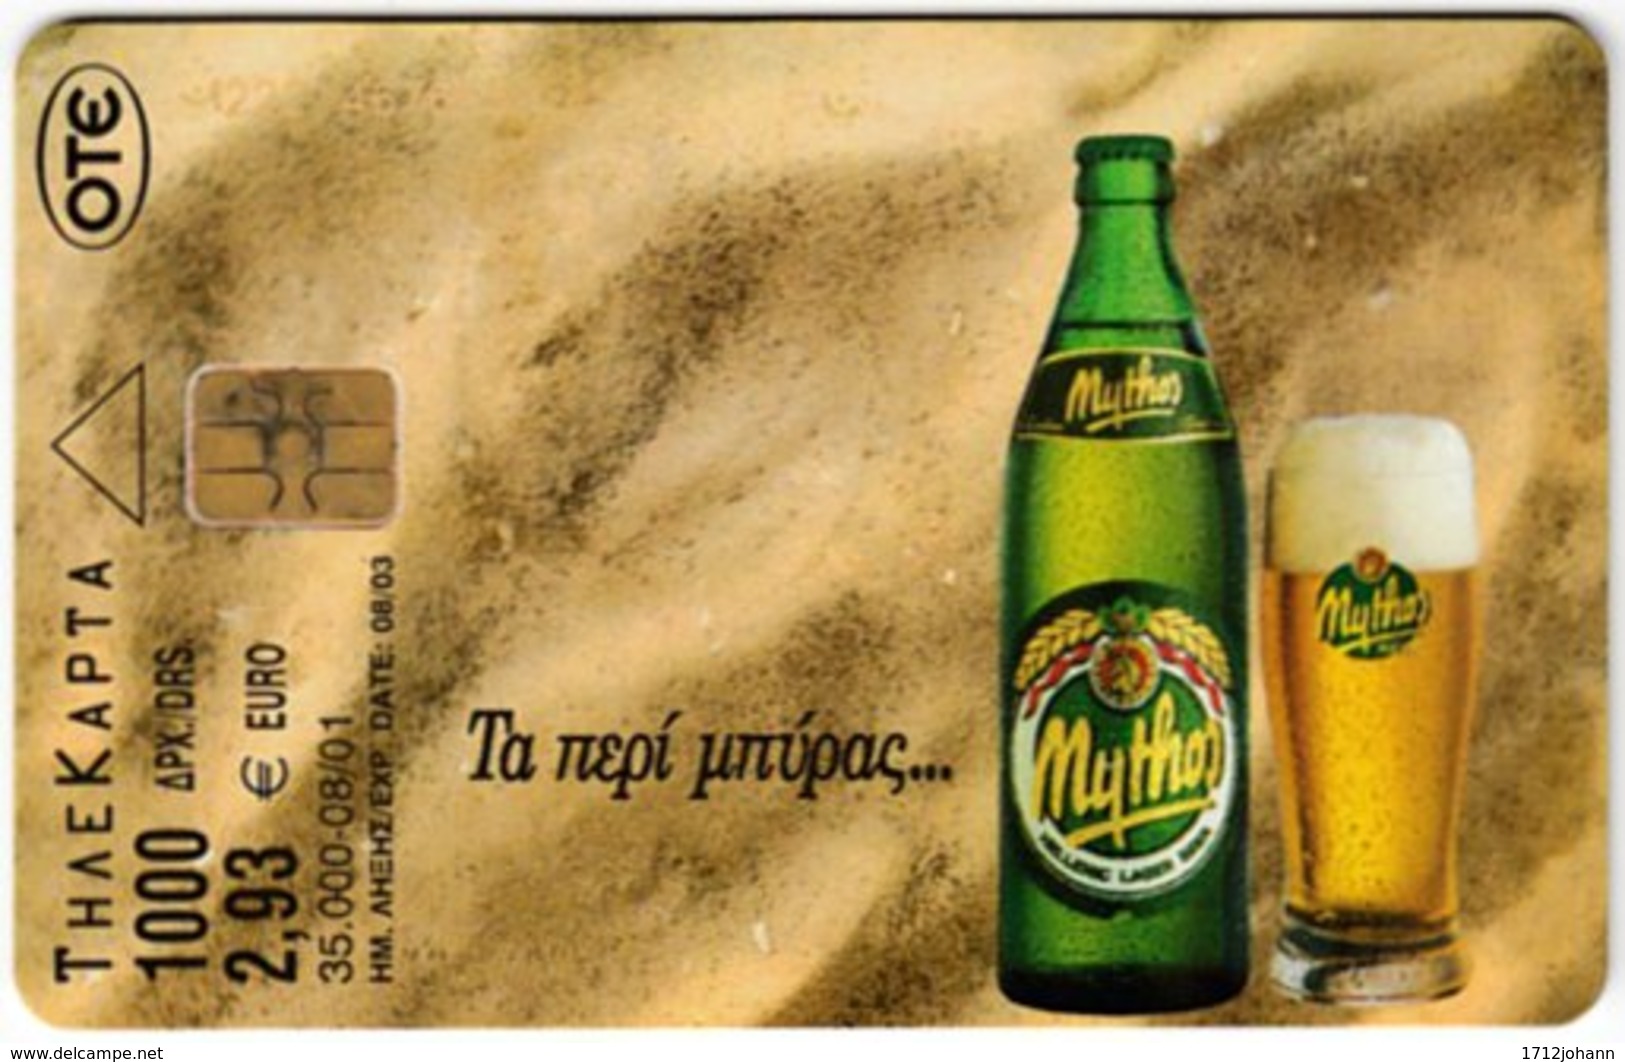 GREECE F-729 Chip OTE - Advertising, Drink, Beer - Used - Greece